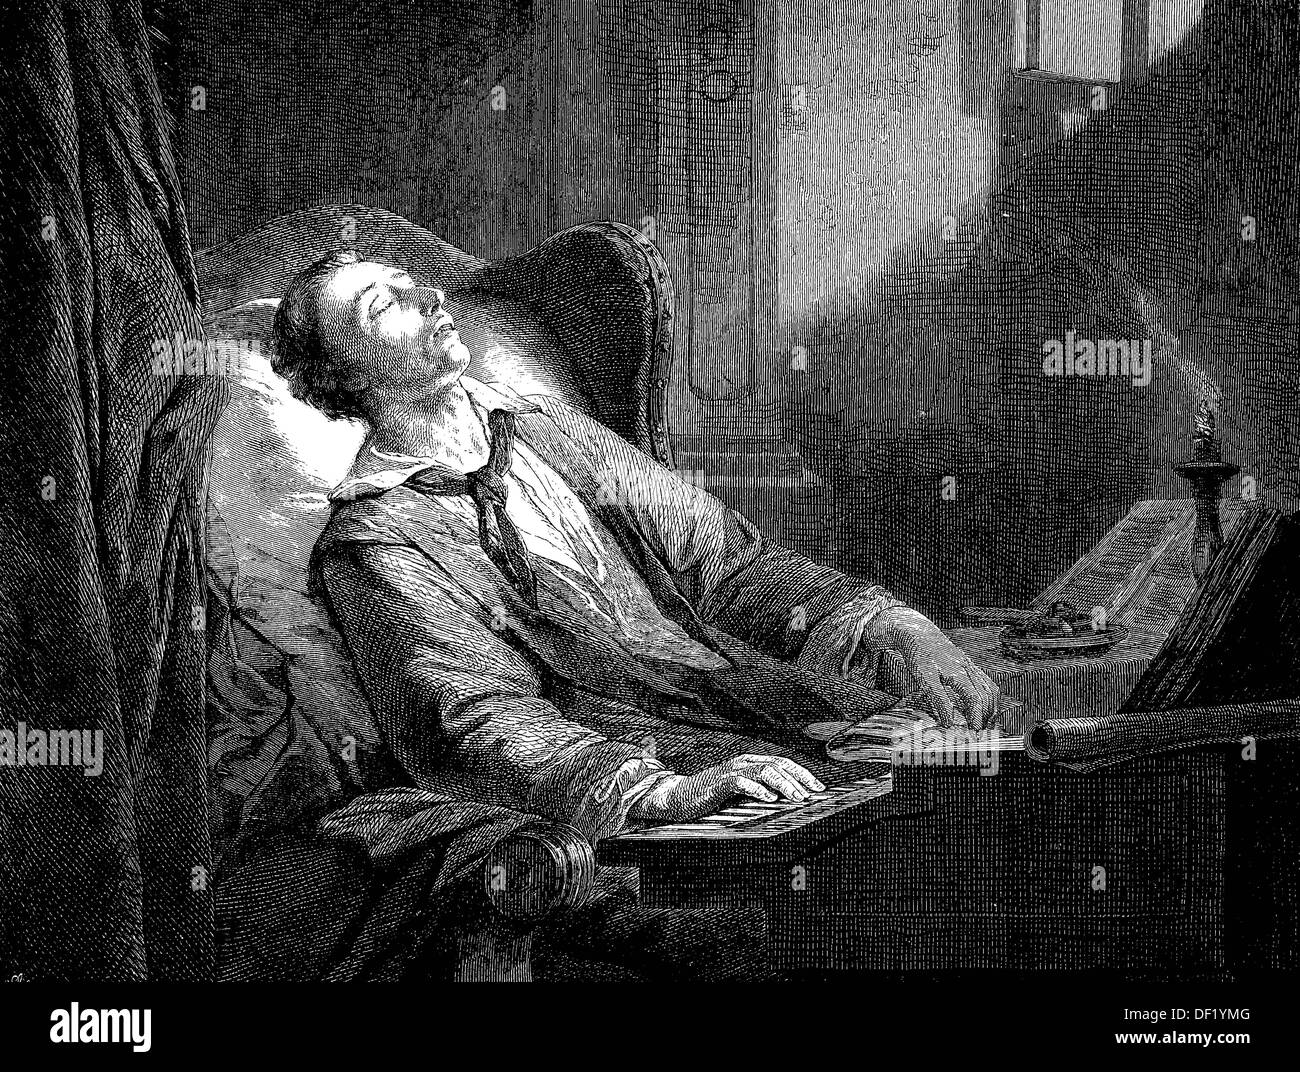 Carl Maria Friedrich Ernst von Weber, 1786-1826, German composer, conductor  and pianist, shortly before his death, woodcut from Stock Photo - Alamy